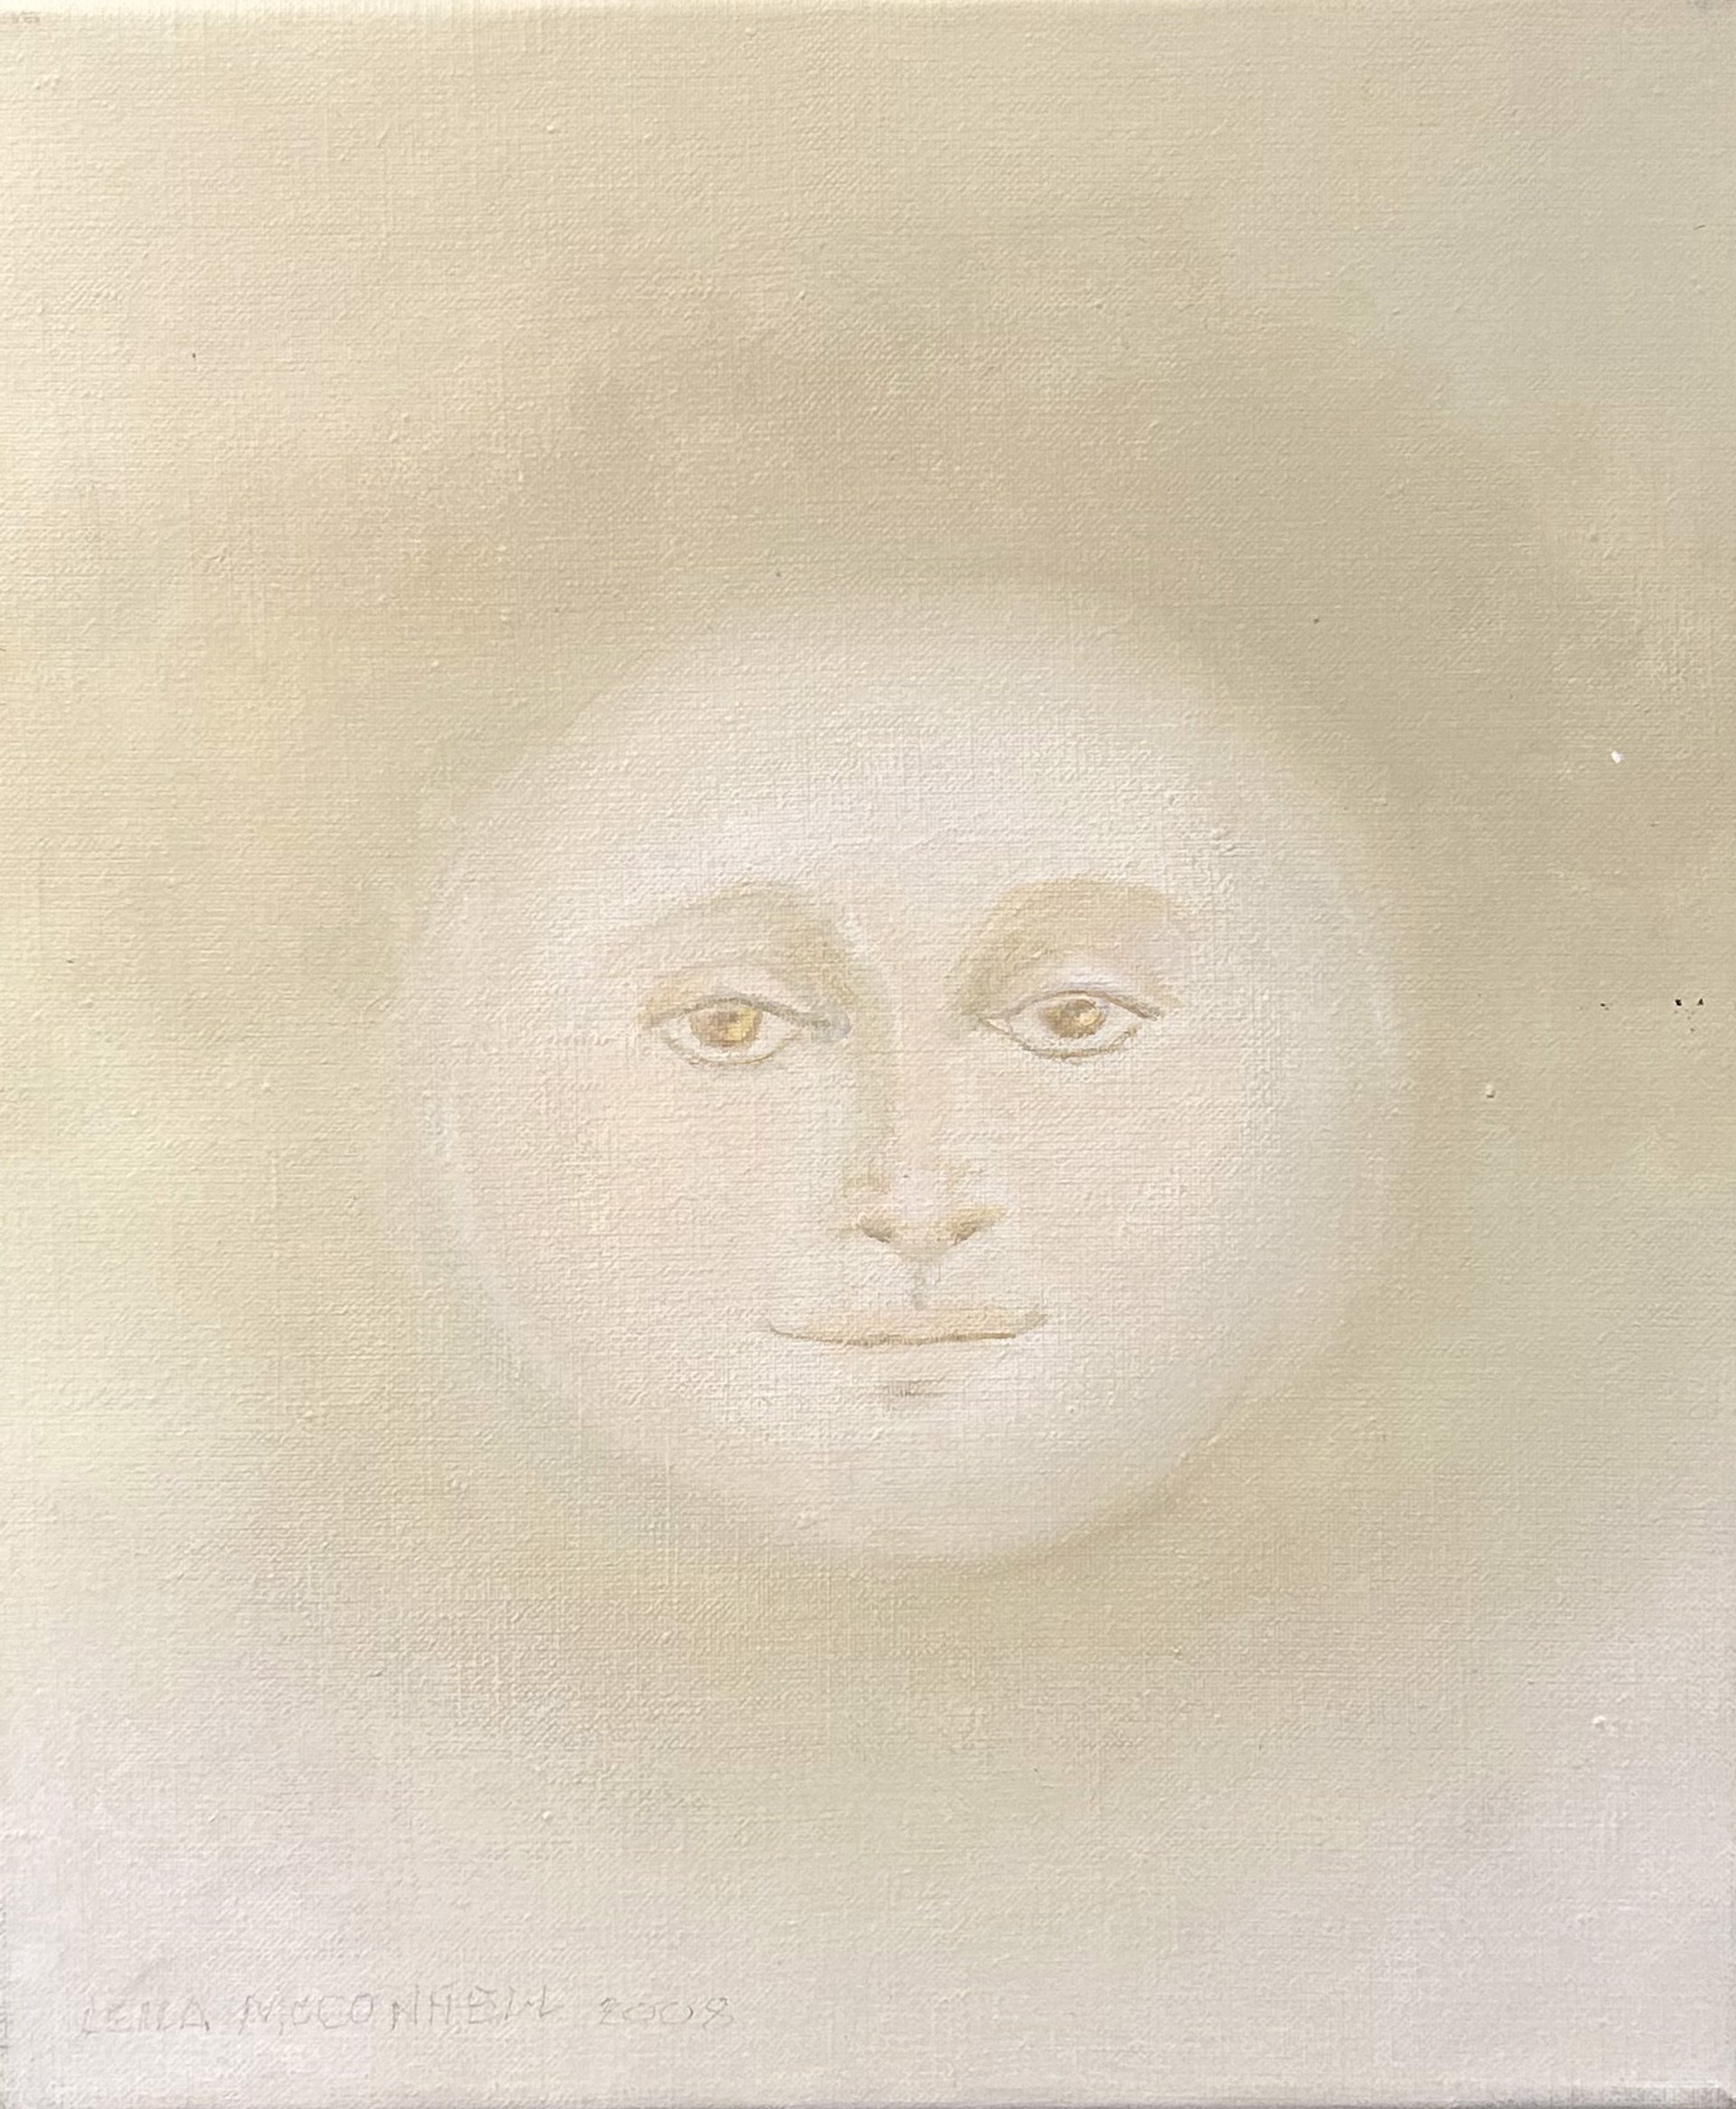 Moonface - pale green/gray by Leila McConnell